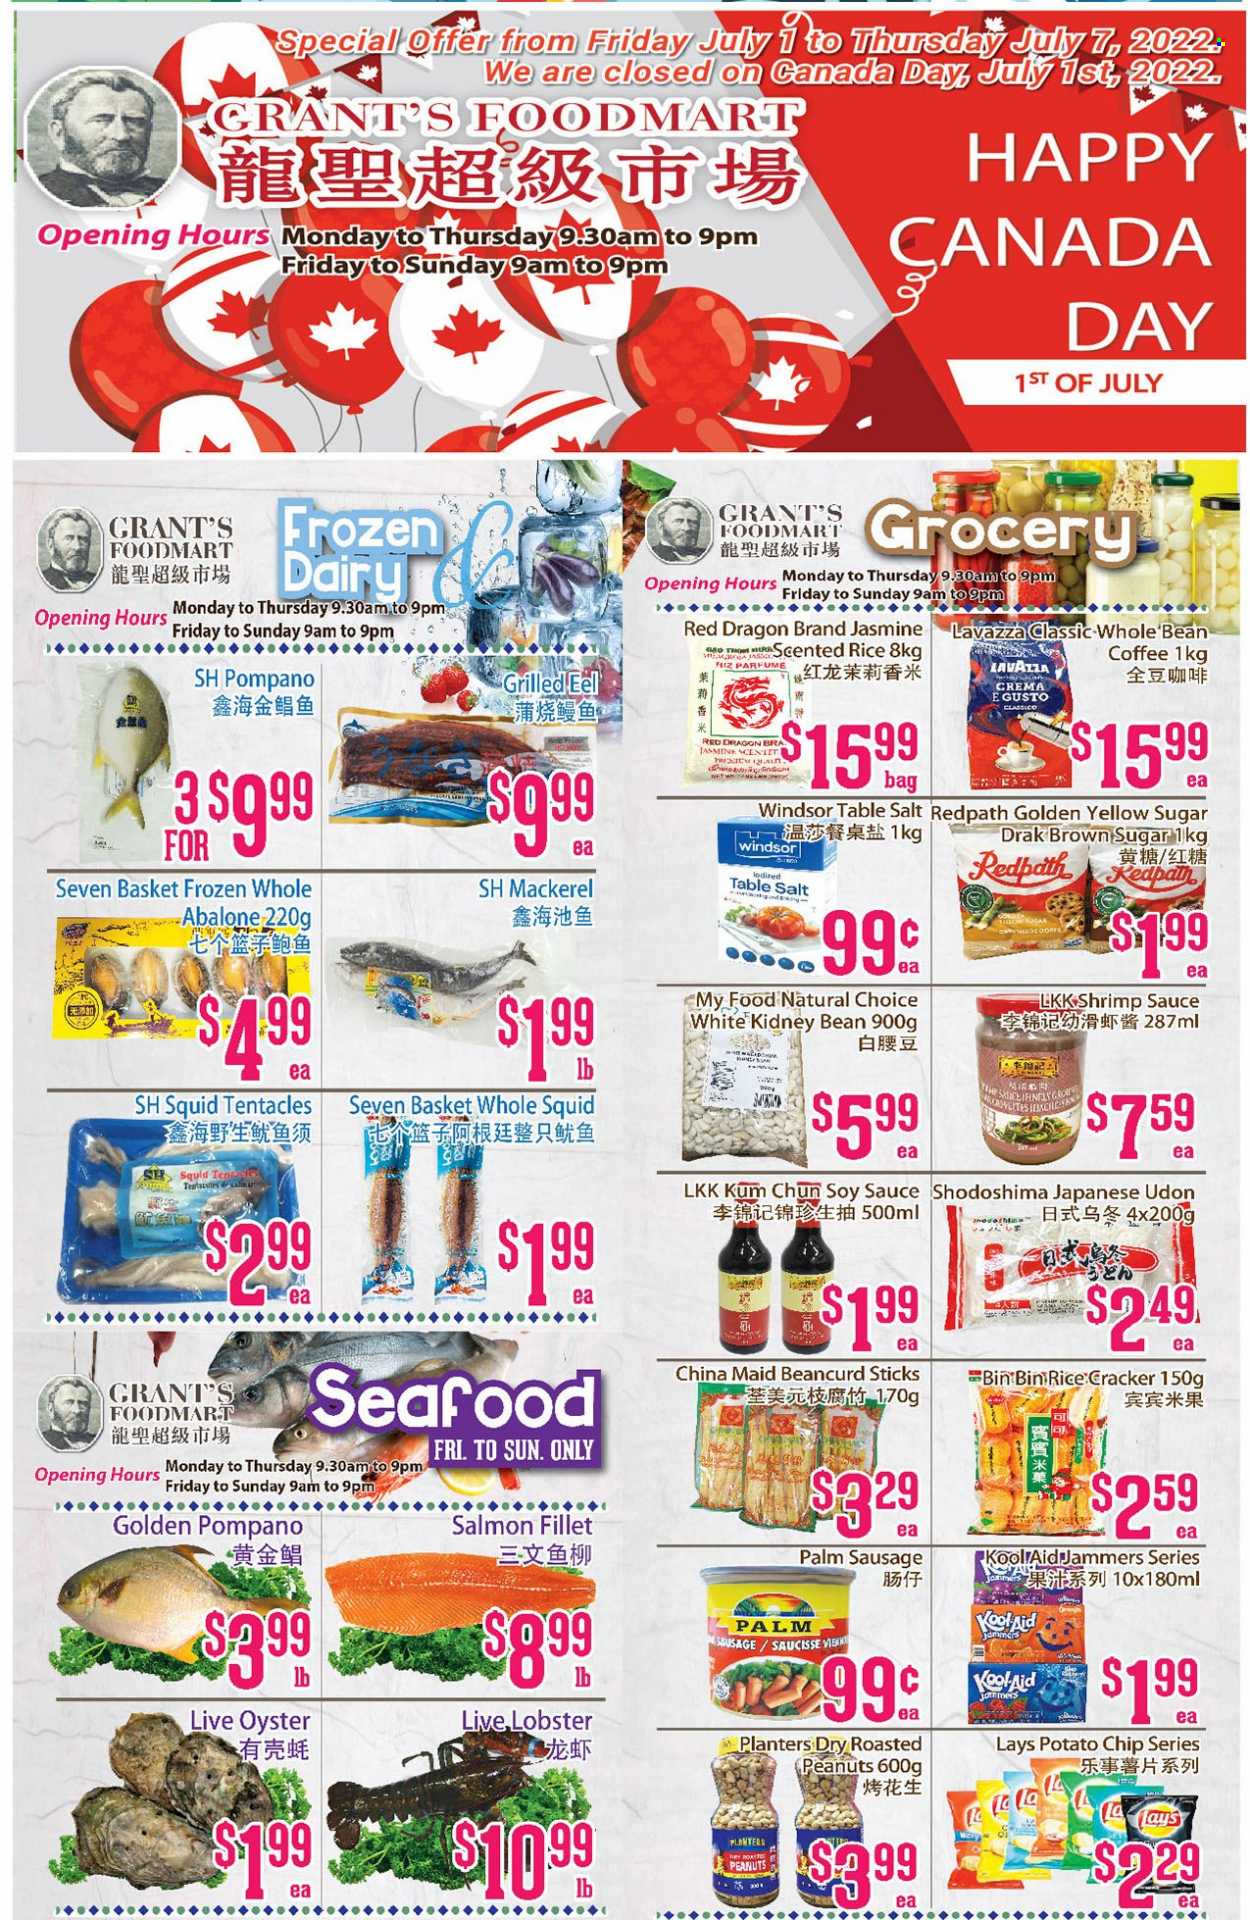 thumbnail - Grant's Foodmart Flyer - July 01, 2022 - July 07, 2022 - Sales products - eel, lobster, mackerel, salmon, salmon fillet, squid, oysters, pompano, seafood, shrimps, abalone, sauce, sausage, crackers, Lay’s, rice crackers, cane sugar, rice, soy sauce, shrimp sauce, Classico, roasted peanuts, peanuts, Planters, coffee, Lavazza, Grant's, kool aid. Page 2.